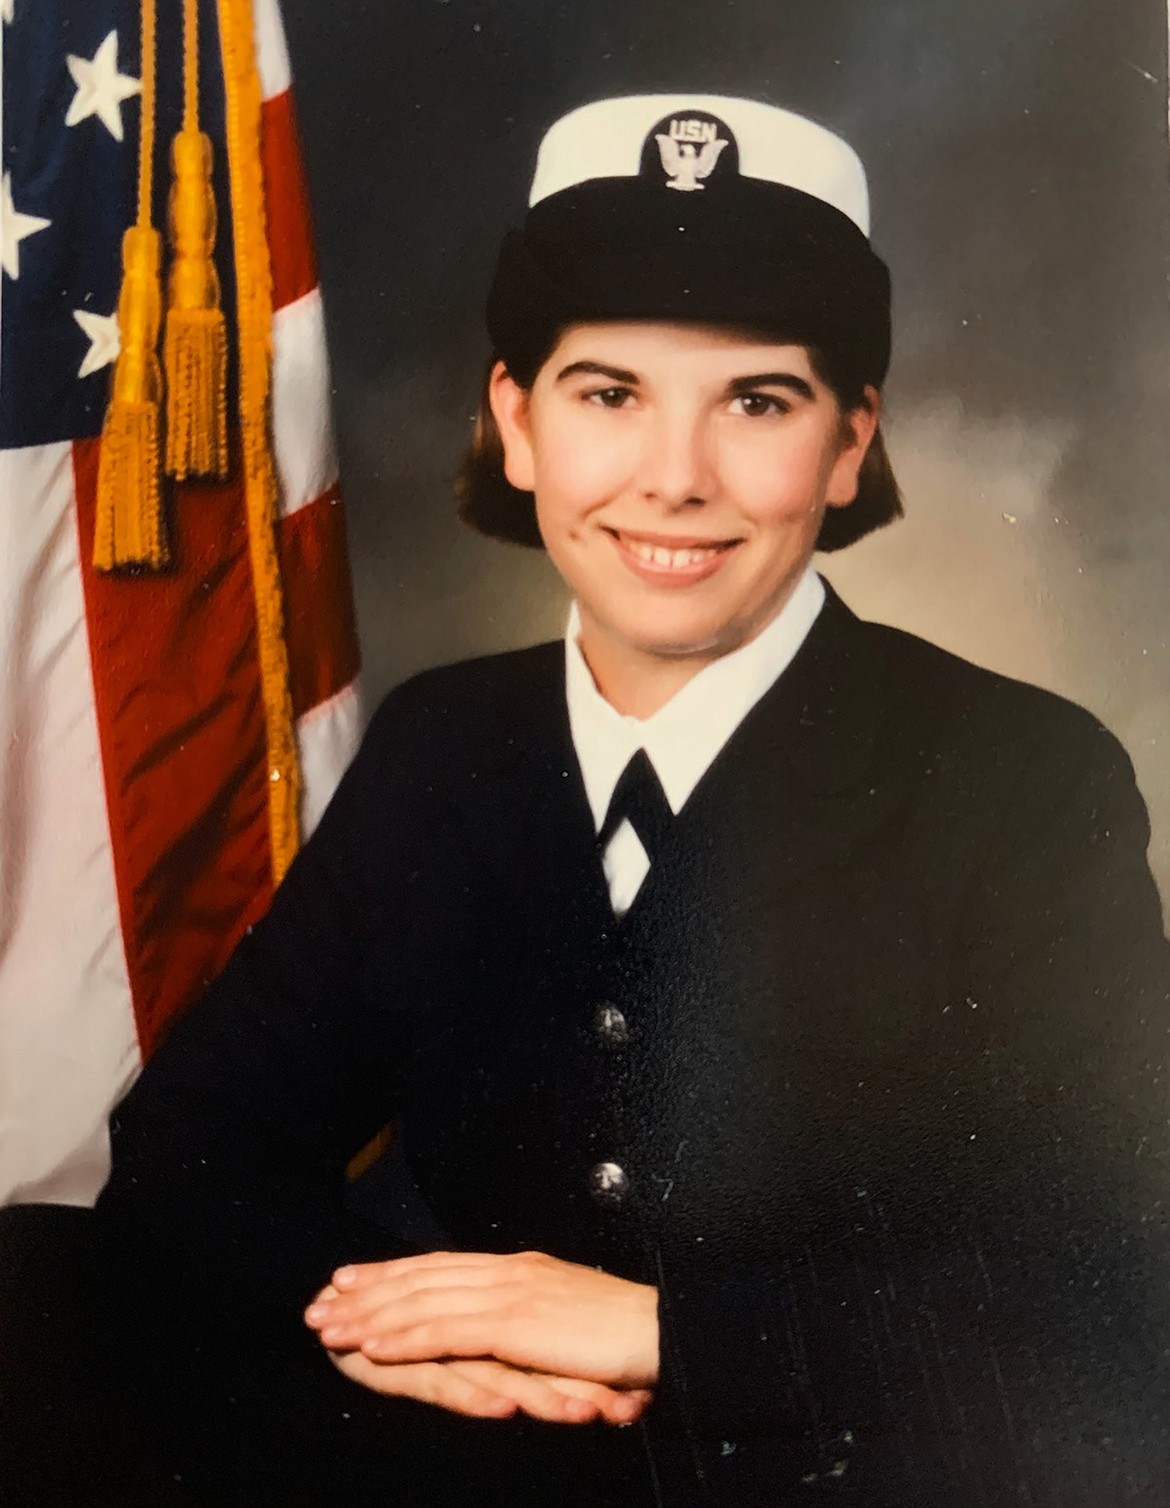 Christina “Chris” Gaffield served in the United States Navy.